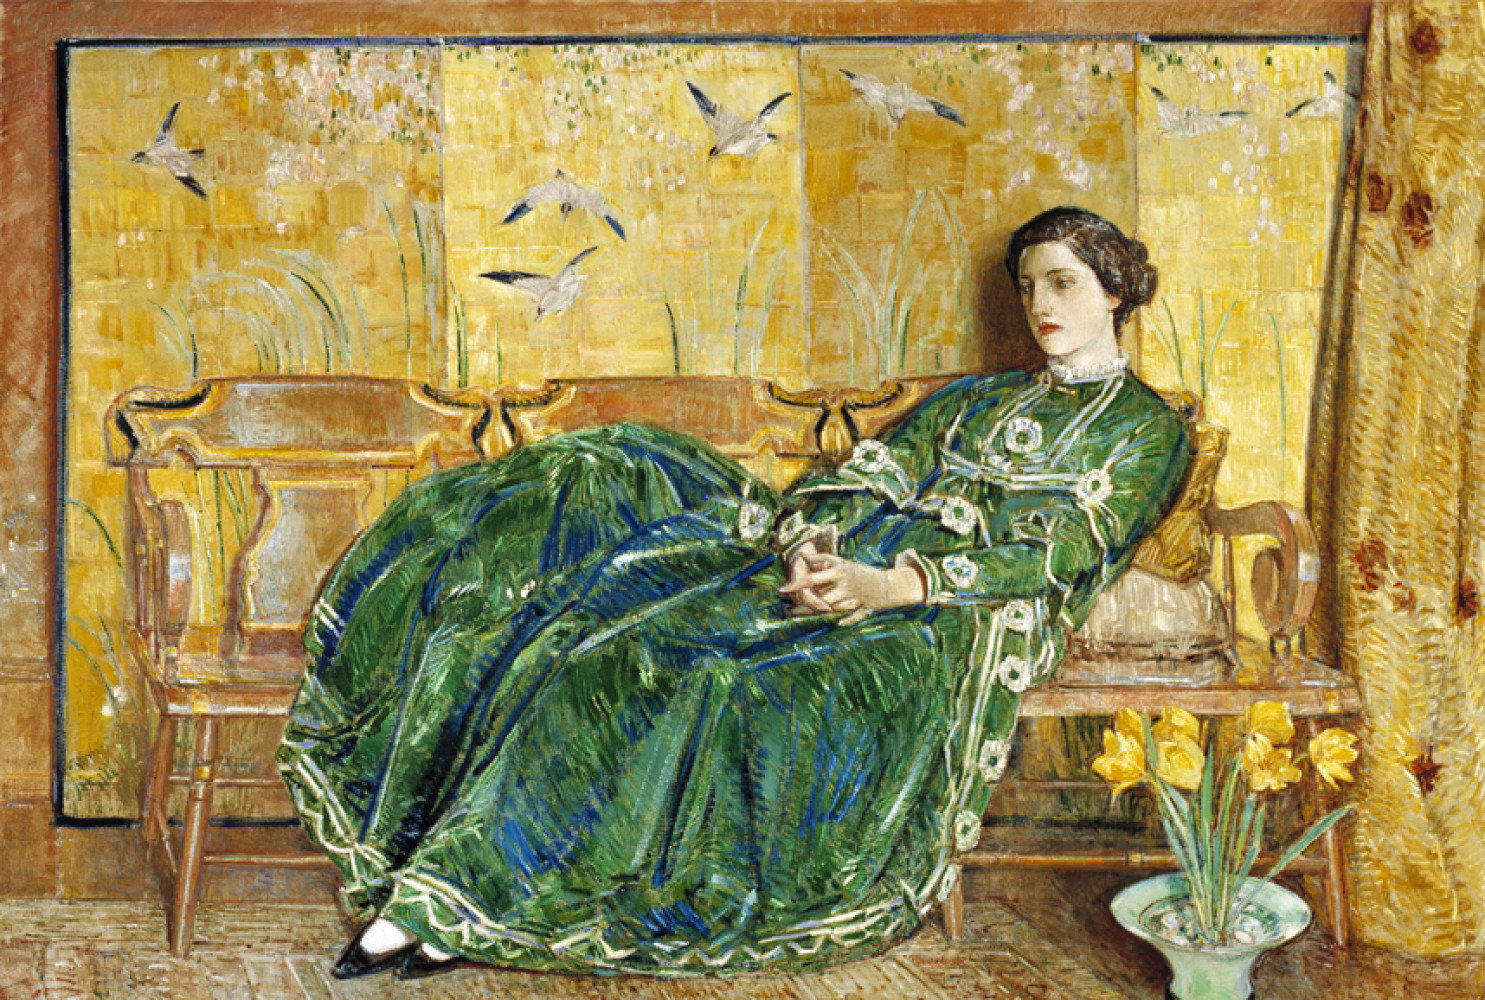 April:(The Green Gown); 1920, by Childe Hassam (American, 1859 - 1935); Oil on canvas; 56 x 82 1/4 inches; Gift of Mr. and Mrs. Archer M. Huntington; 1936.009.0001.